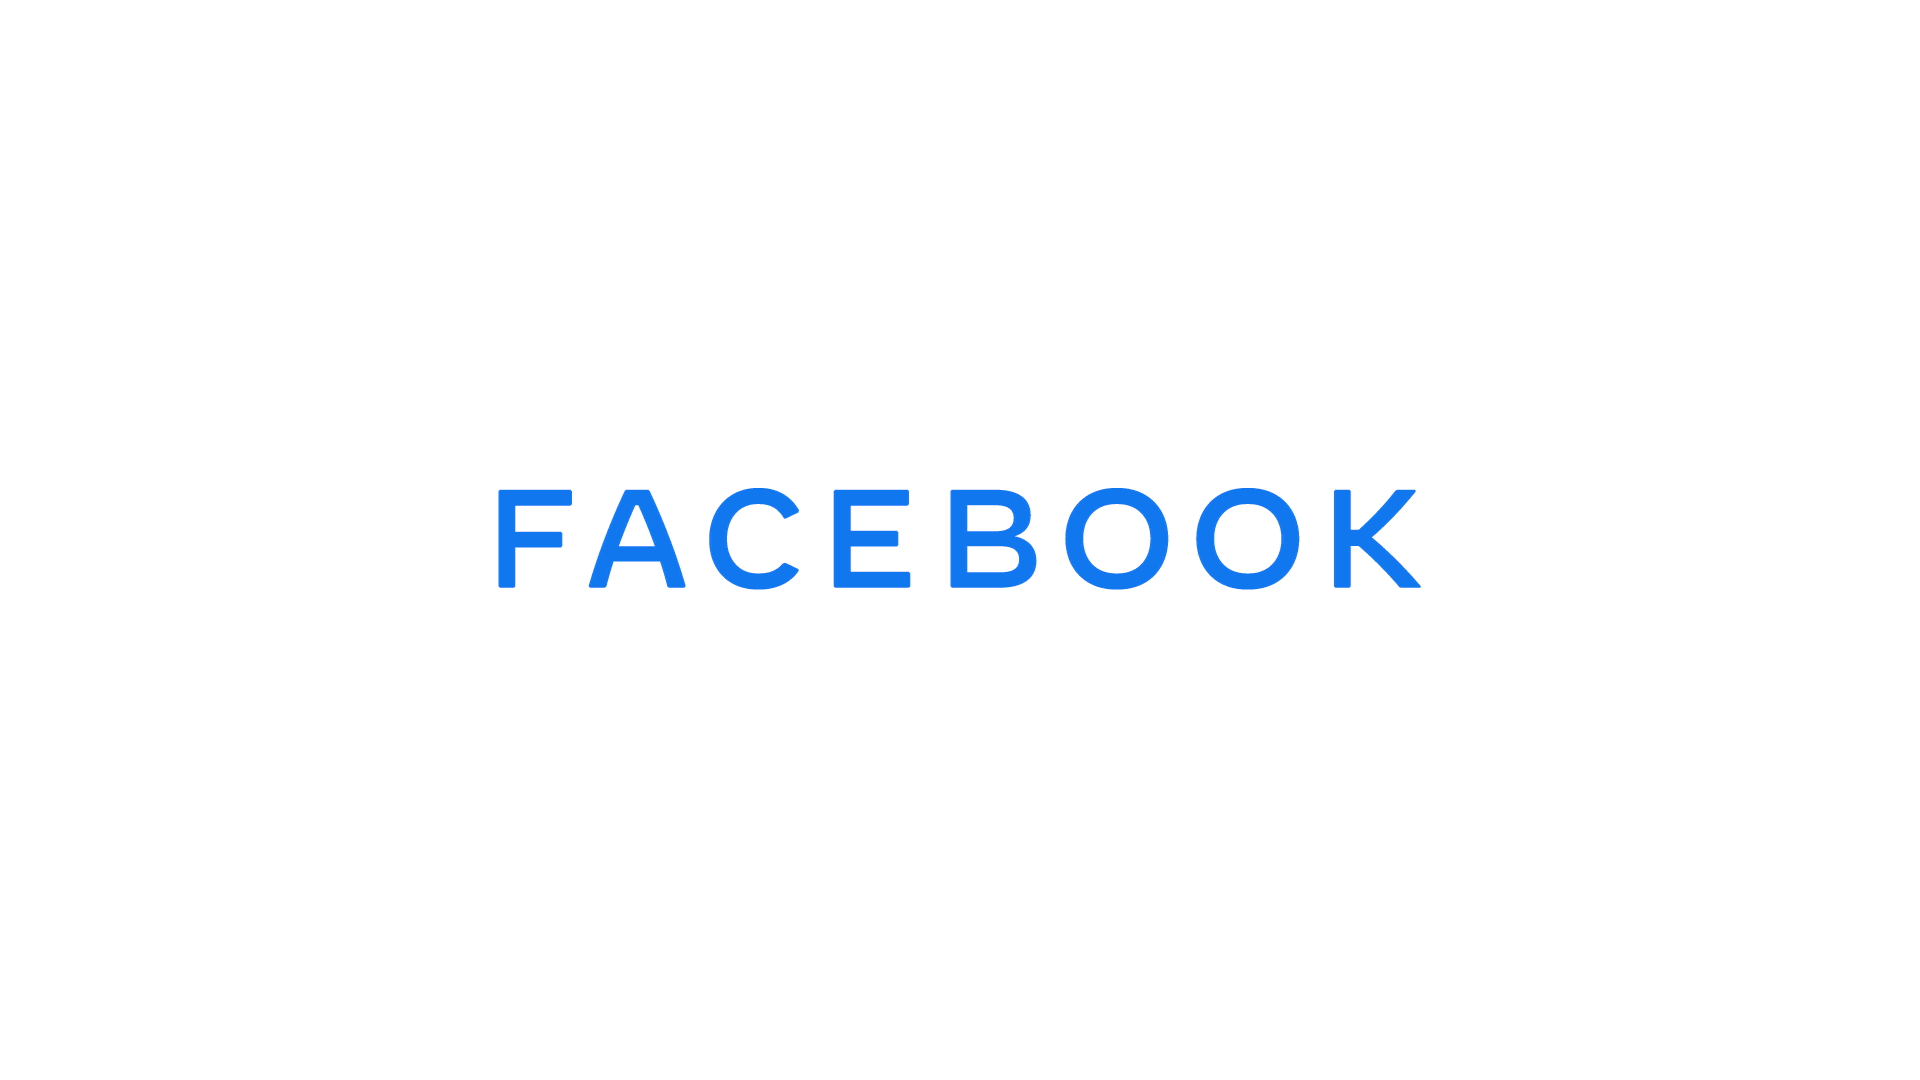 facebooks new branding distinguishes app from acquisitions